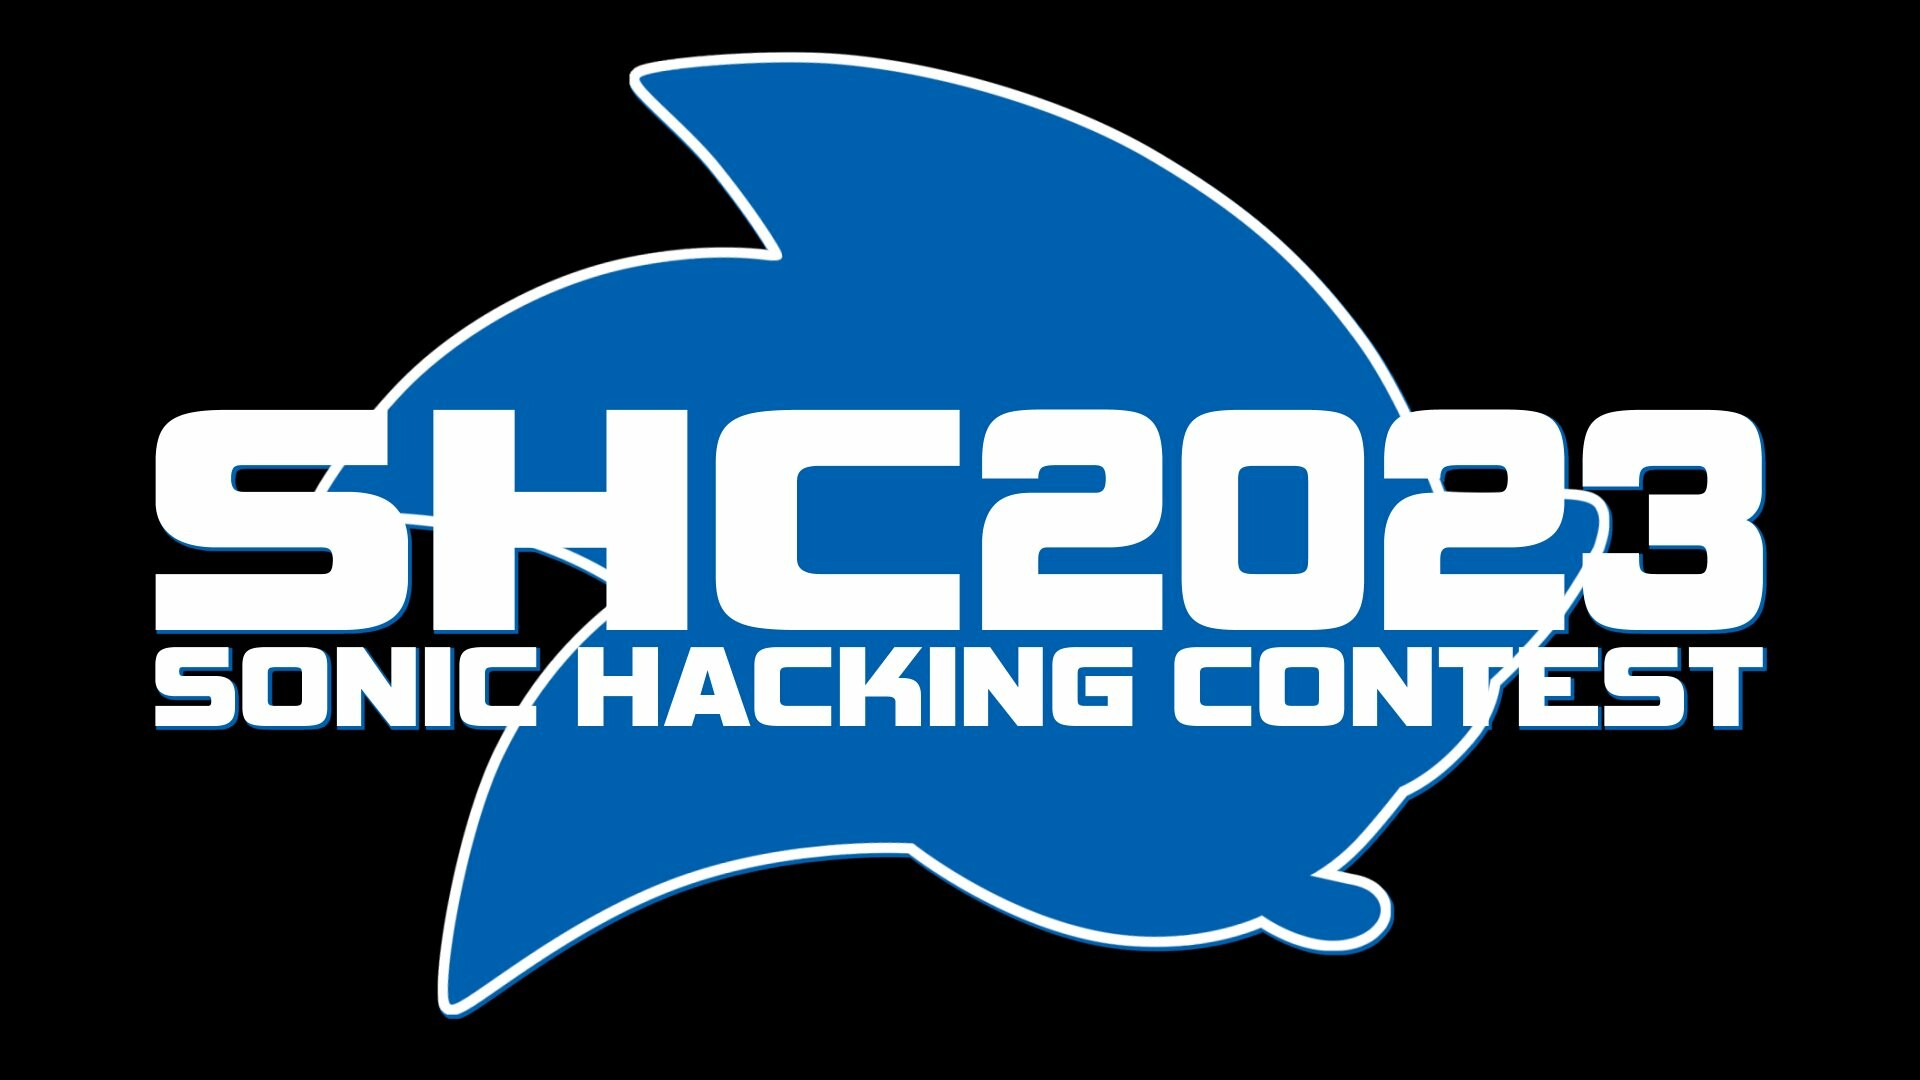 More information about "The Sonic Hacking Contest Is Returning For 2023!"